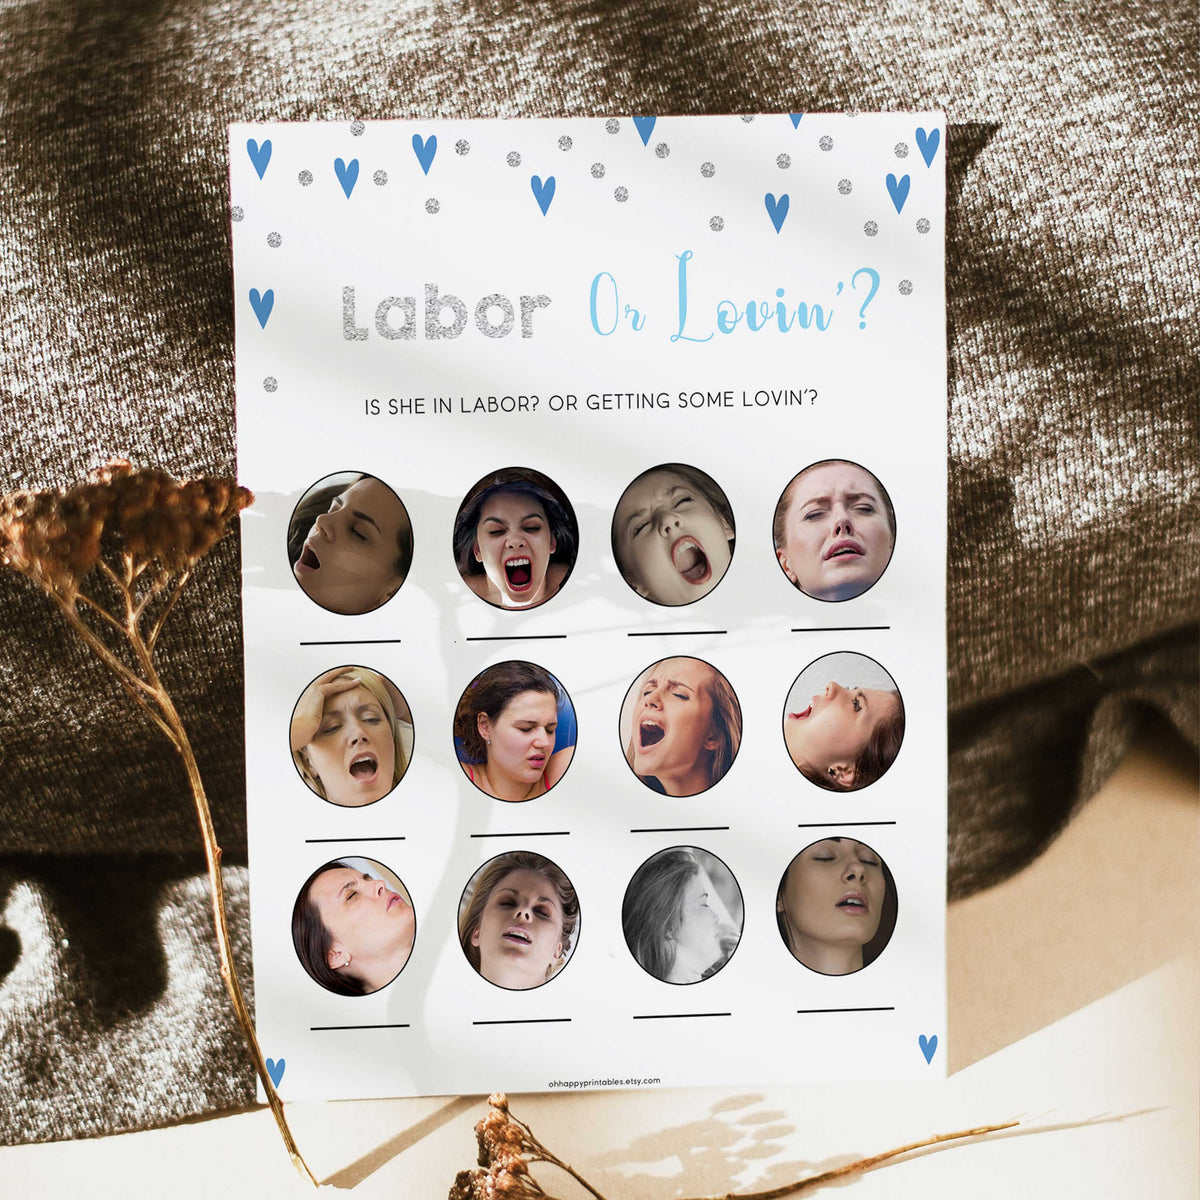 Labor or lovin game, Printable baby shower games, small blue hearts fun baby games, baby shower games, fun baby shower ideas, top baby shower ideas, silver baby shower, blue hearts baby shower ideas